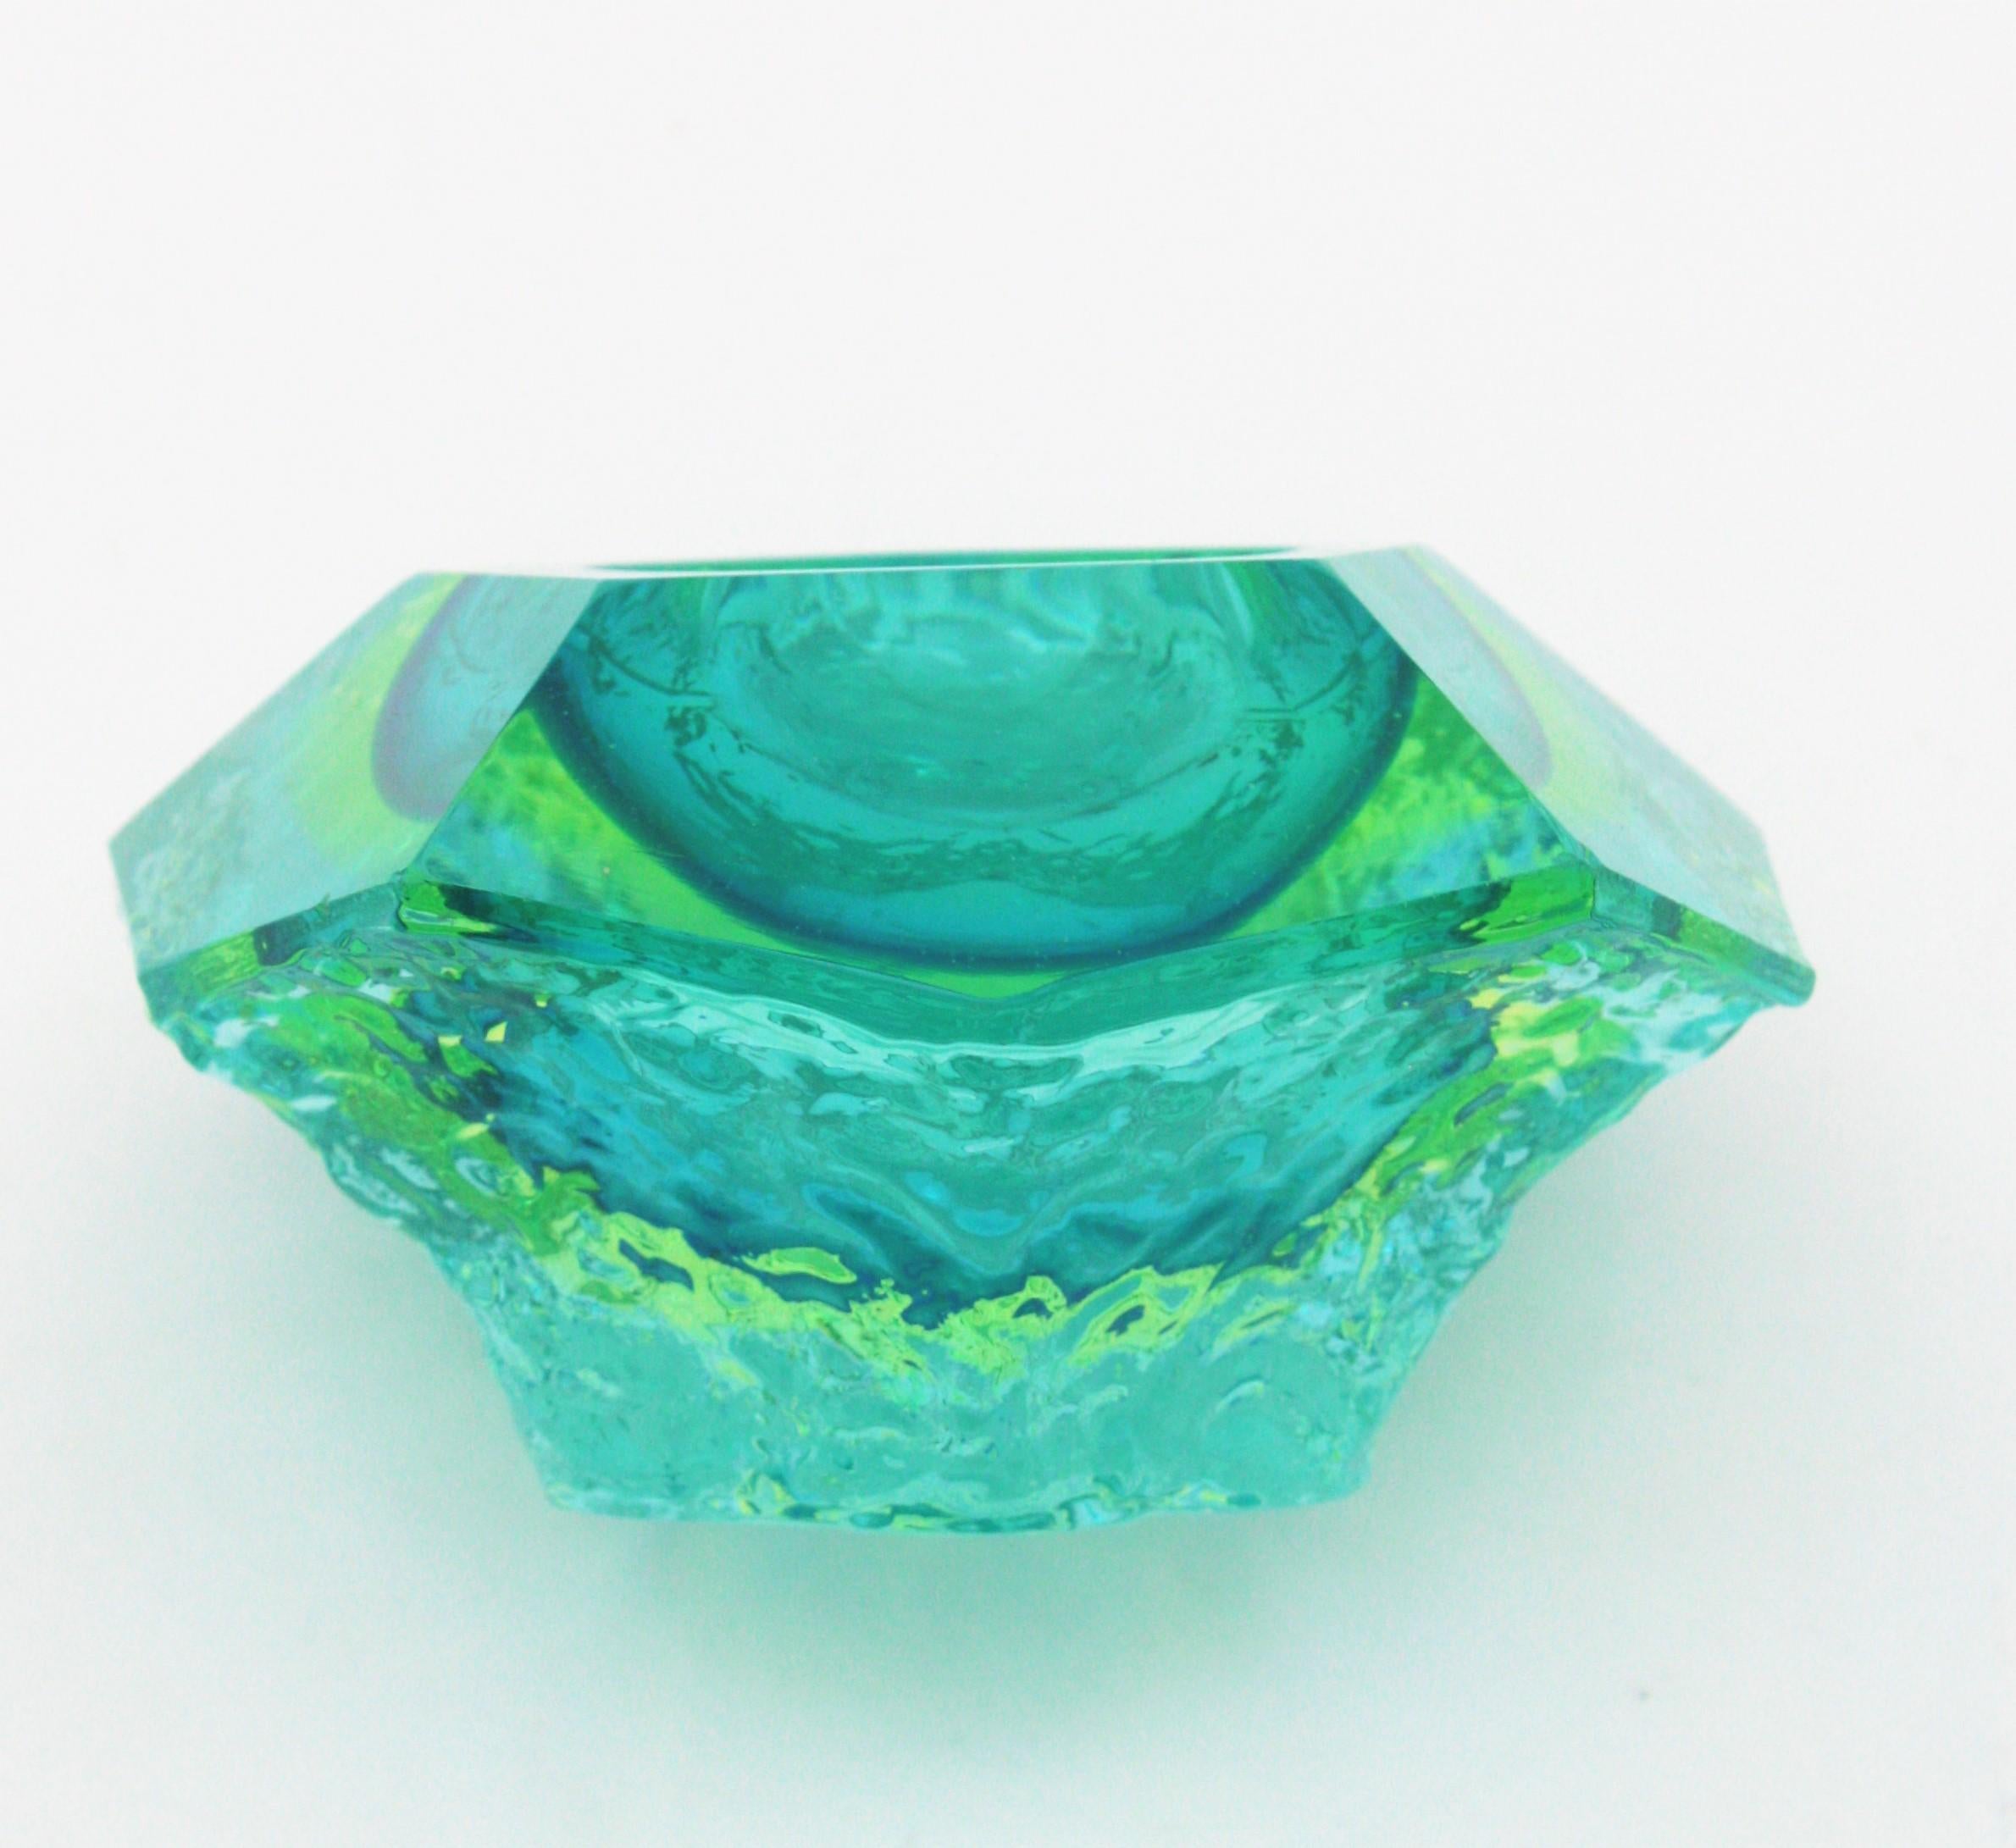 Mandruzzato Sommerso Mint Green Lime Blue Ice Glass Faceted Murano Bowl /Ashtray 5